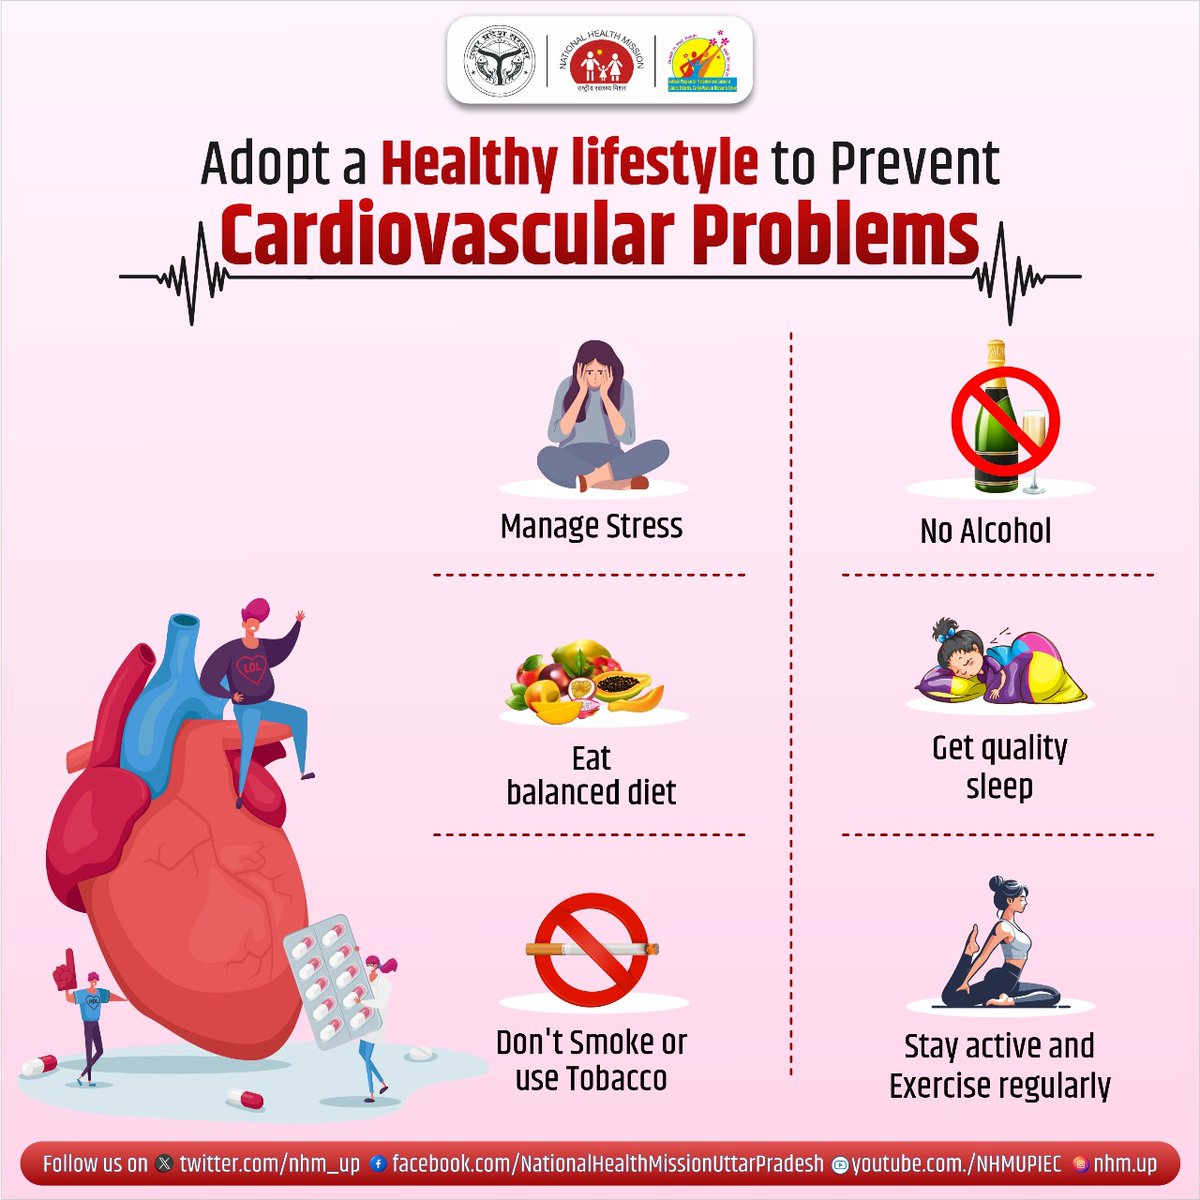 #Cardiovascular problems can be #prevented with focused on healthy diet, #lifestyle interventions & #initial treatment✌️ Be aware-Be Healthy #HealthyHabits #HealthForAll